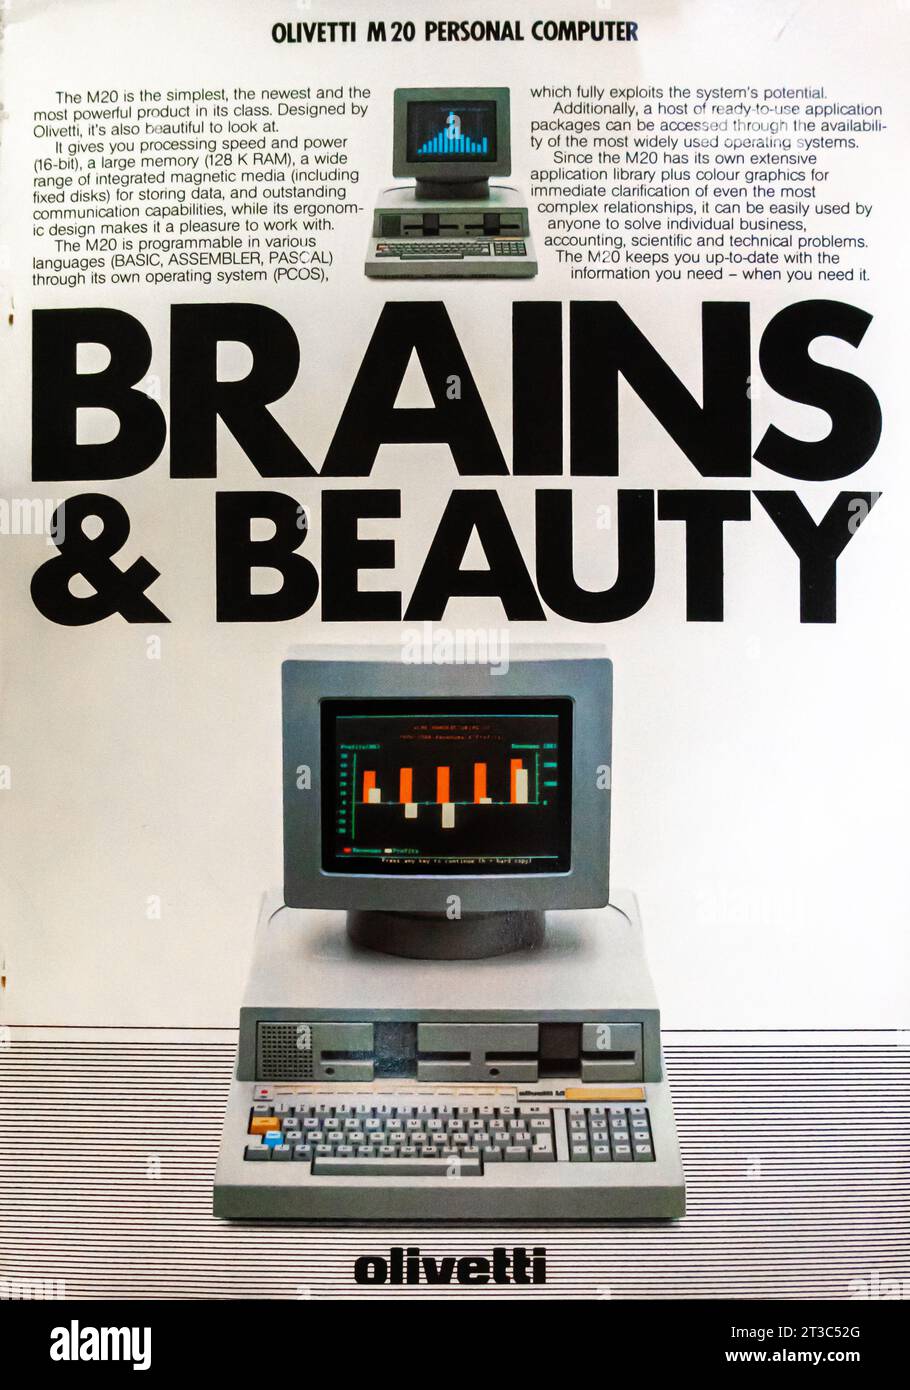 1983 Olivetti M20 personal computer ad 'Brains and Beauty' Stock Photo